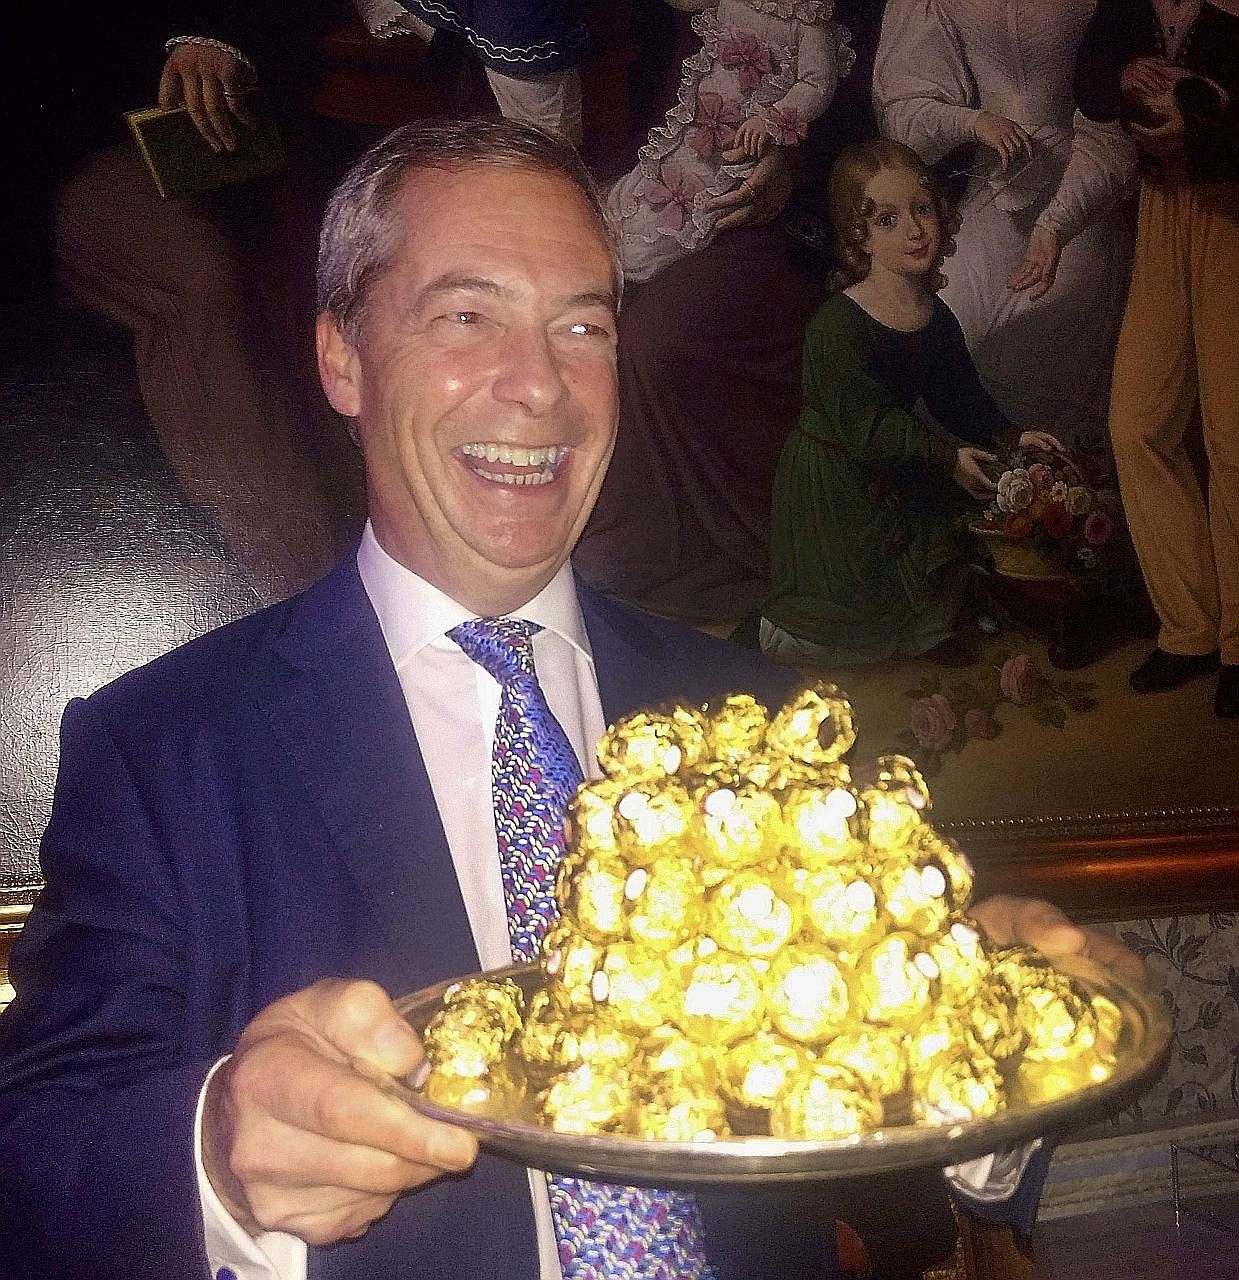 Mr Farage, who has been backed by Mr Donald Trump to be Britain's next US ambassador, in a spoof of the 1990s Ferrero Rocher ad - that was set at an "ambassador's reception" and included the oft-quoted line "You are really spoiling us" - during a par